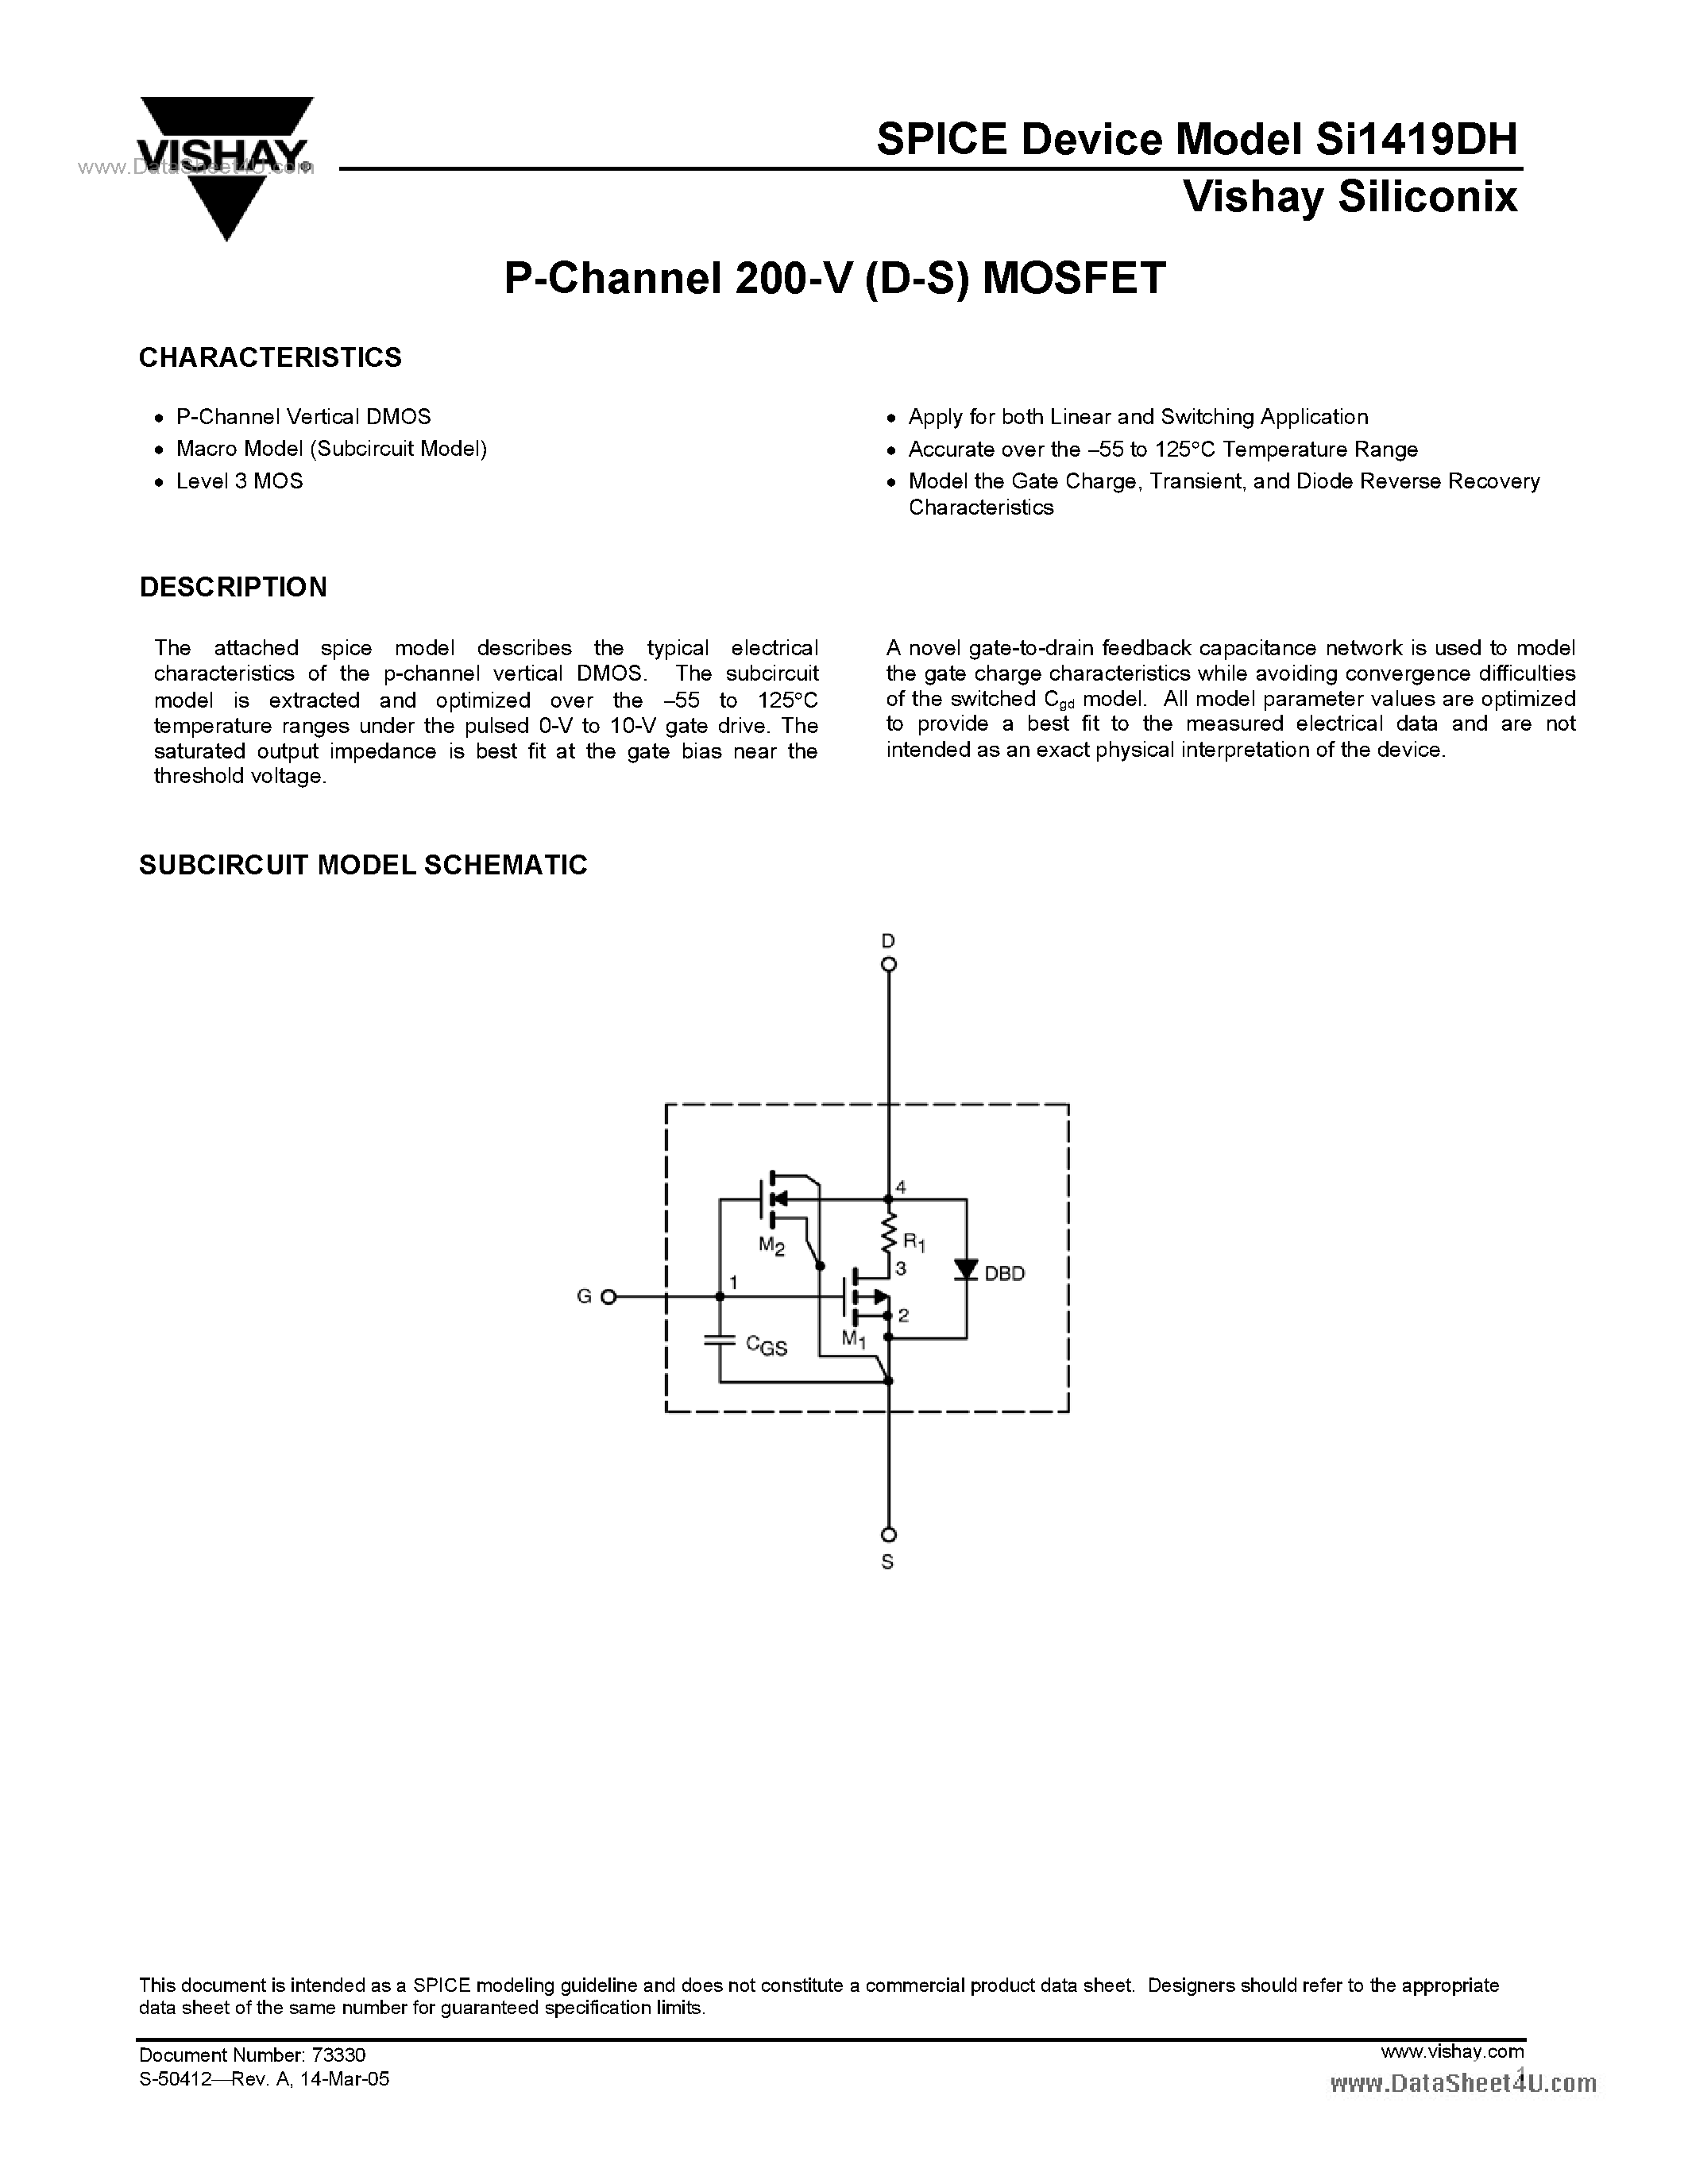 Datasheet SI1419DH - P-Channel 200-V (D-S) MOSFET page 1